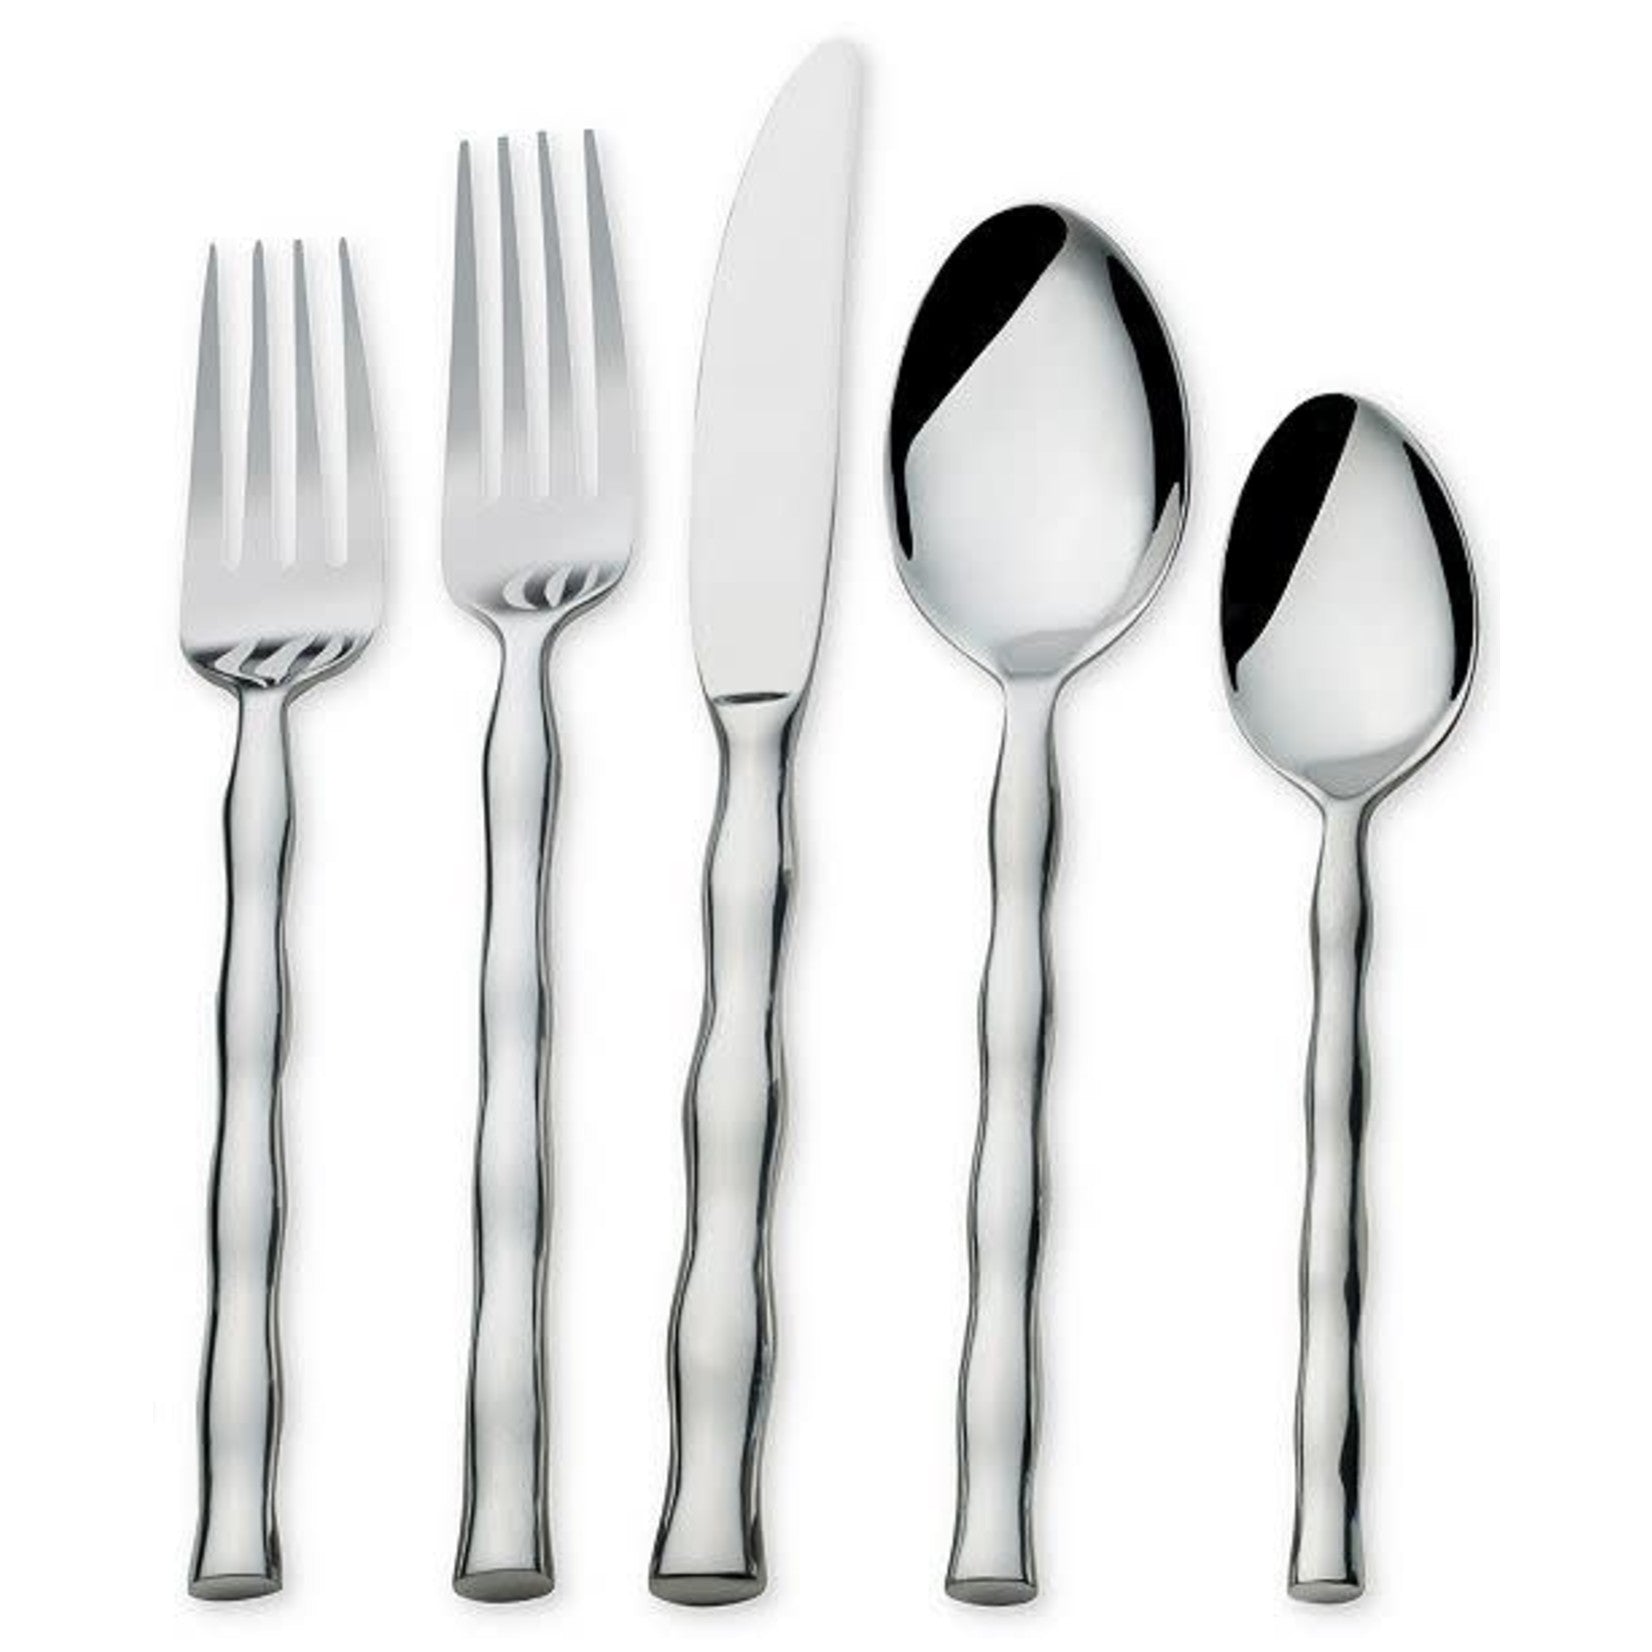 Holister Metropolitan Towle Living Calypso Flatware Forged Stainless Steel 20 Pieces Set, Service for 4 (Flamingo)